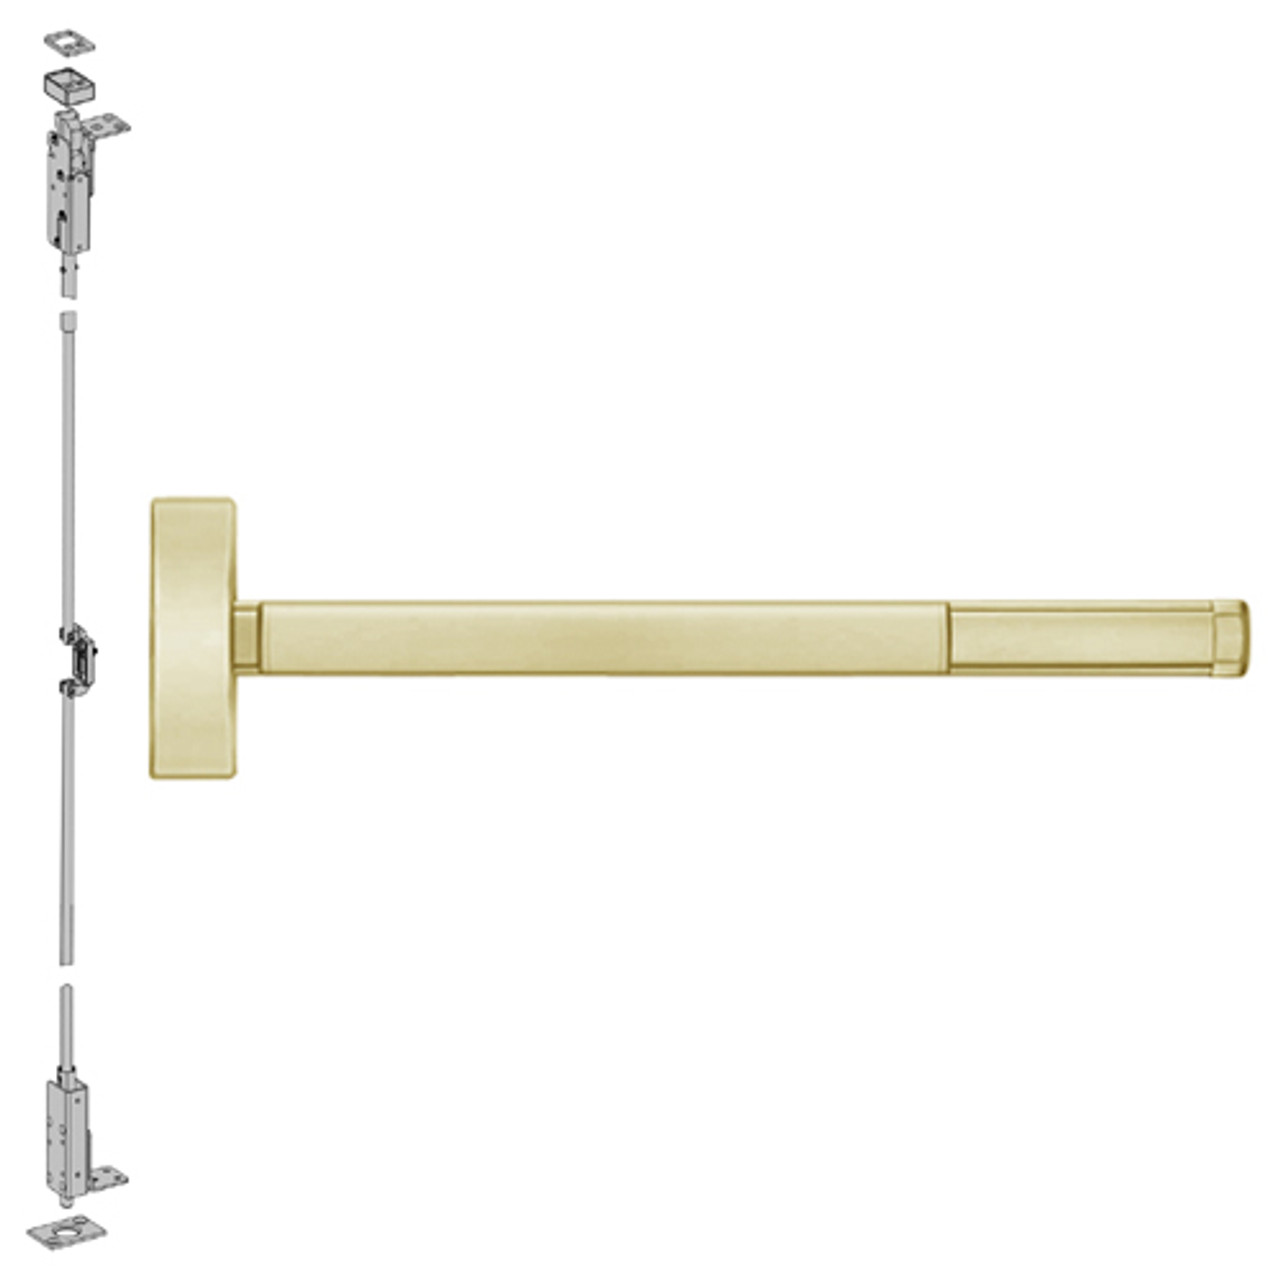 MLRFL2702-606-48 PHI 2700 Series Wood Door Concealed Vertical Exit Device with Motorized Latch Retraction Prepped for Dummy Trim in Satin Brass Finish